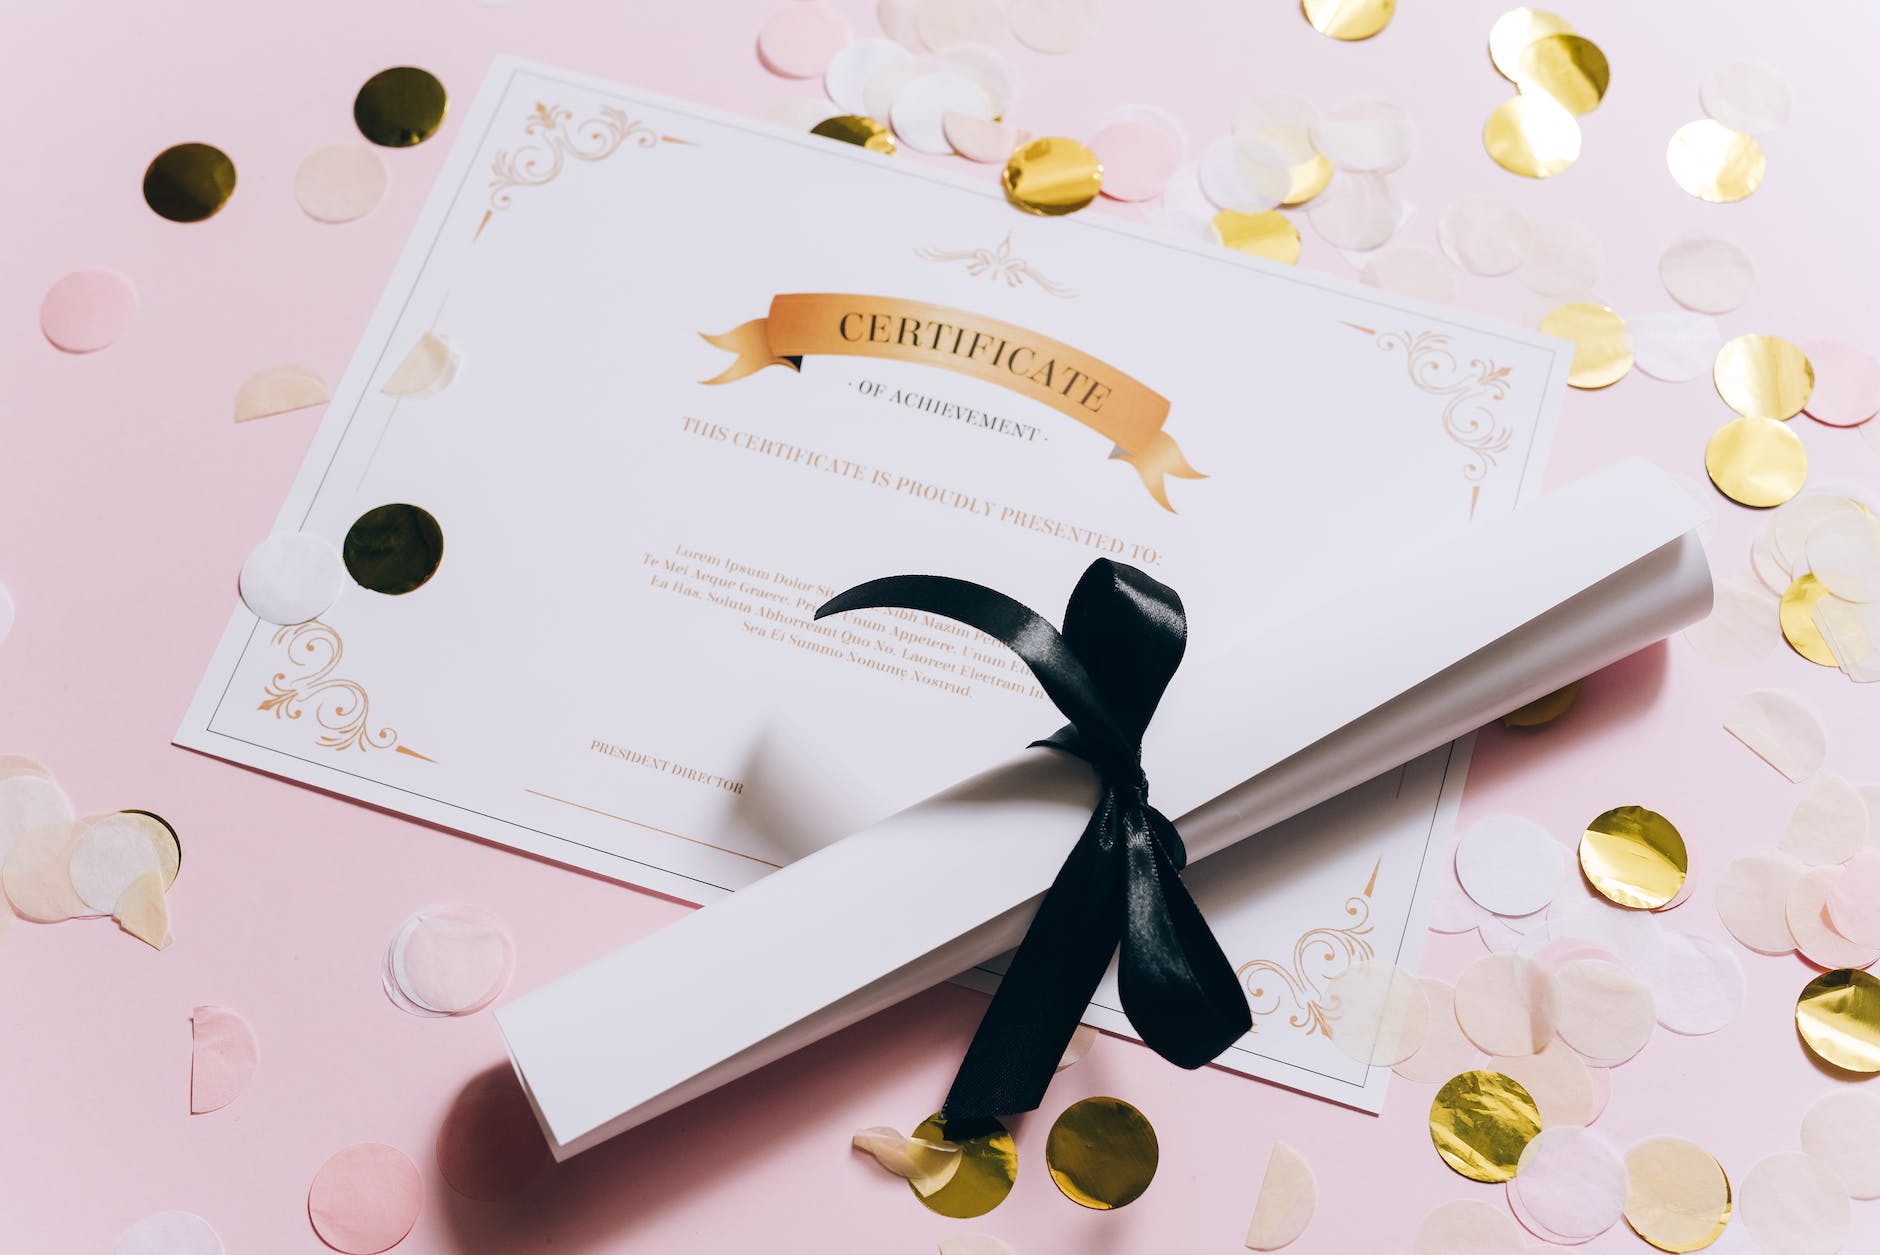 rolled white paper and a certificate on a pink surface